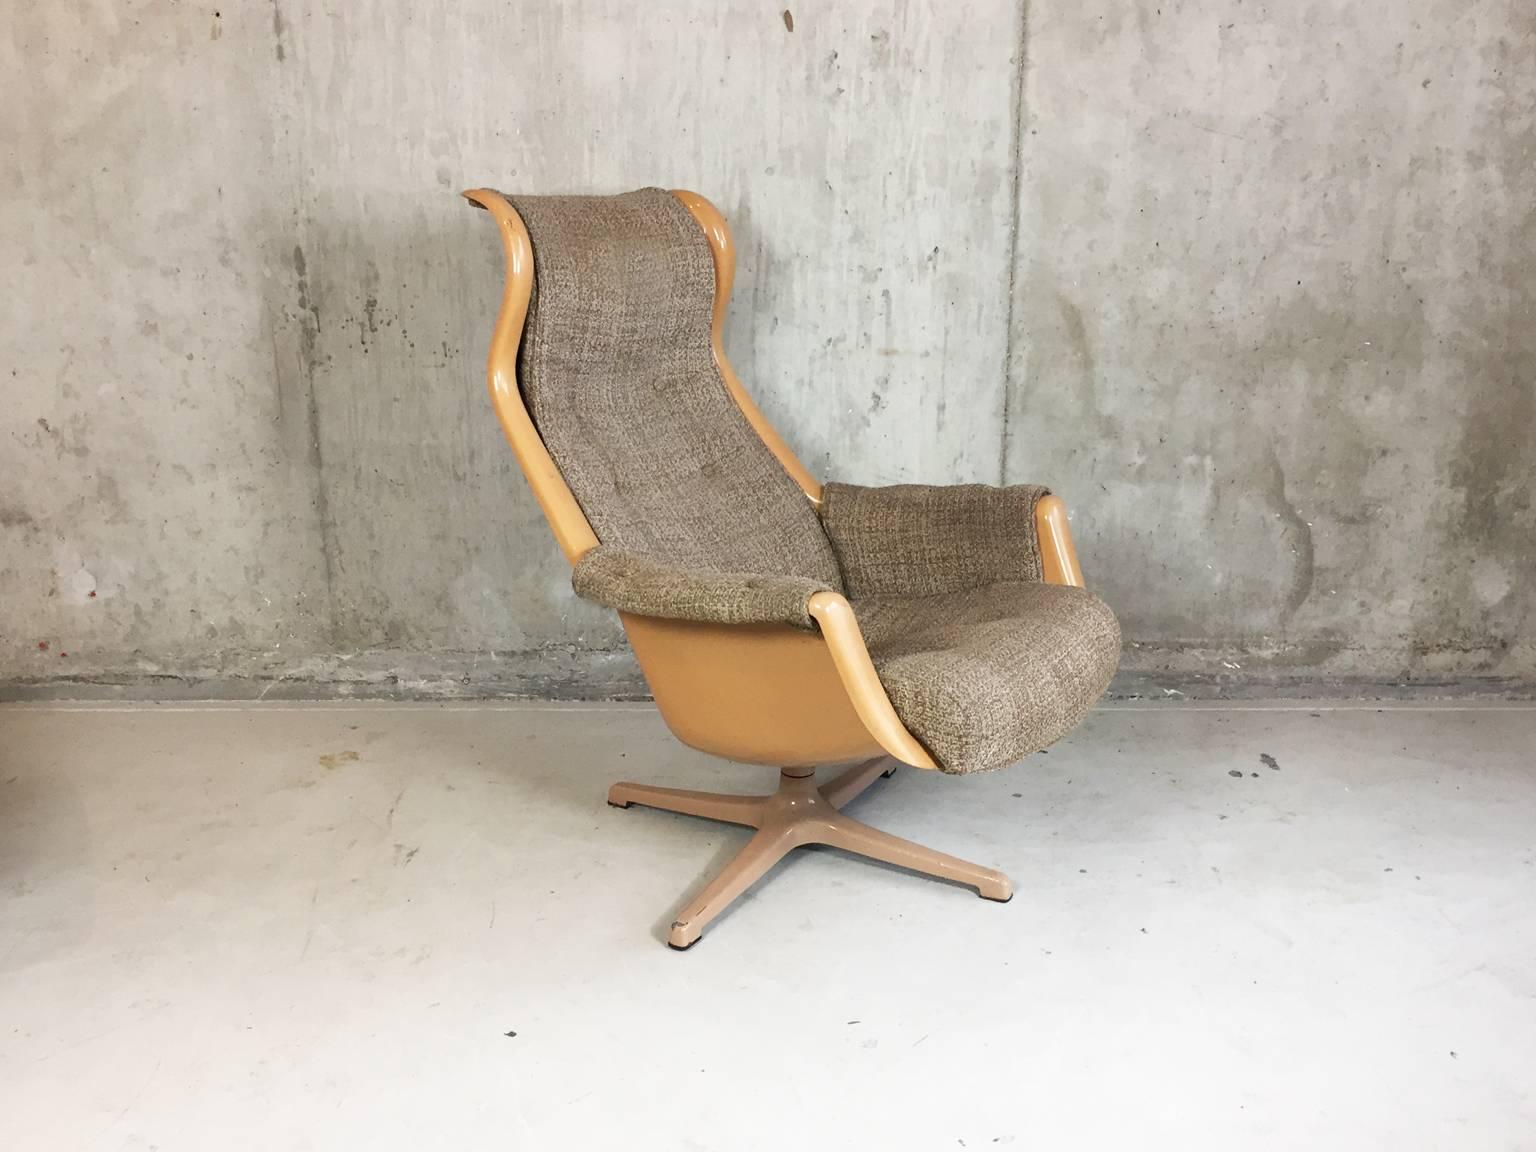 A pair of galaxy or form eight chairs by Alf Svensson & Yngvar Sandstrom for DUX. These chairs are very hard to find as a pair, they are much sought after with a strong investment value.

The design is from 1968 and pre dates designs by Robin